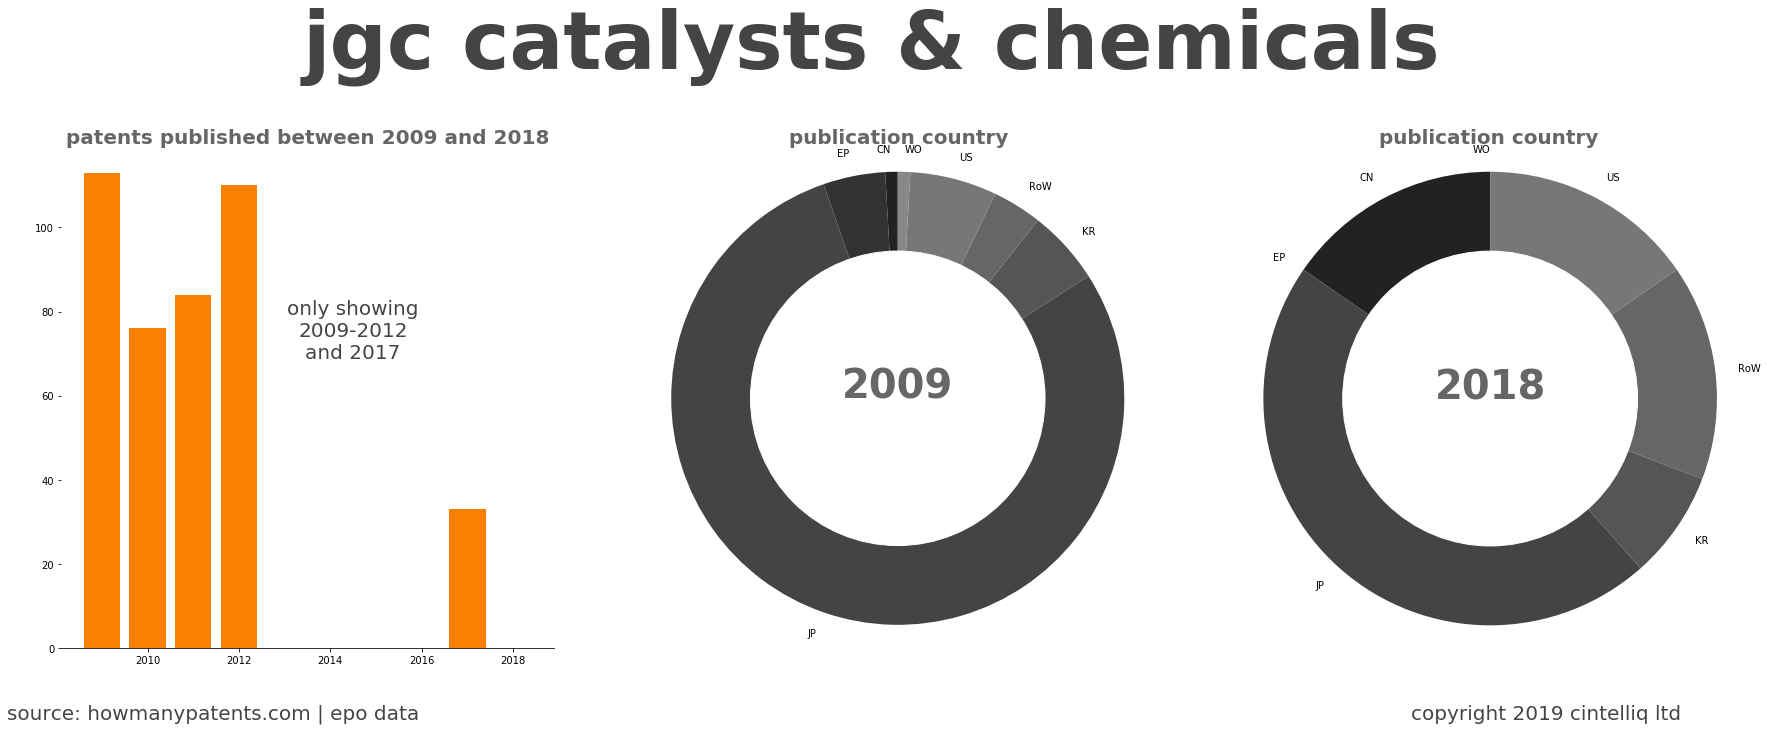 summary of patents for Jgc Catalysts & Chemicals